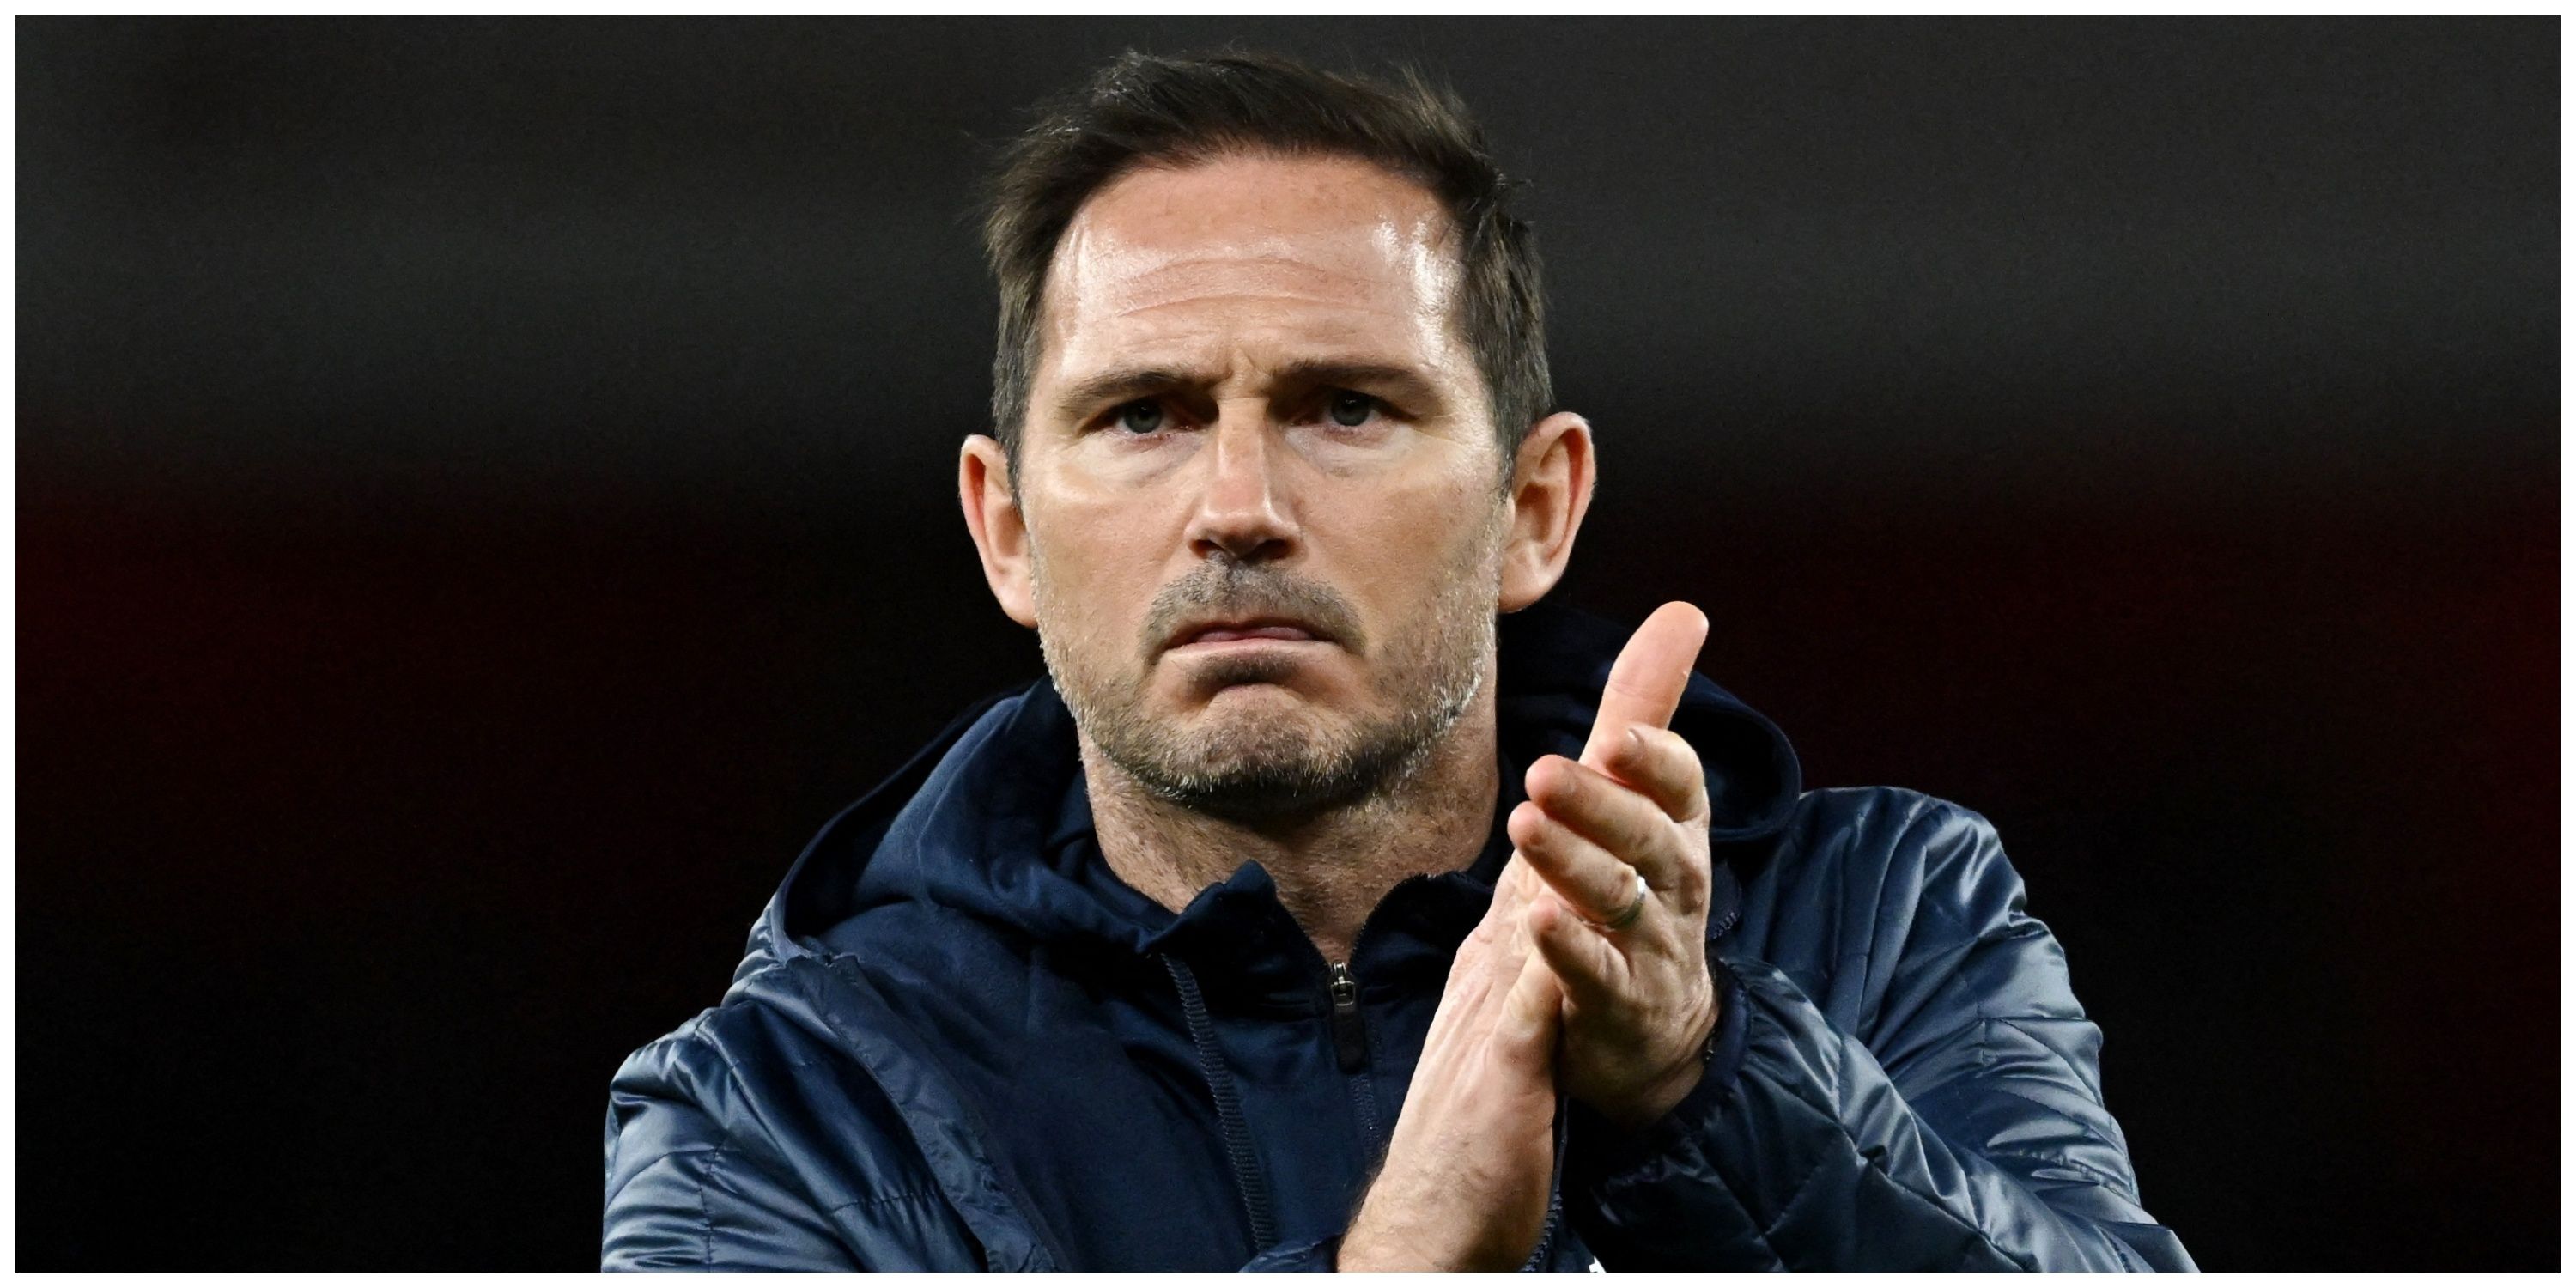 Chelsea interim manager Frank Lampard after Arsenal defeat